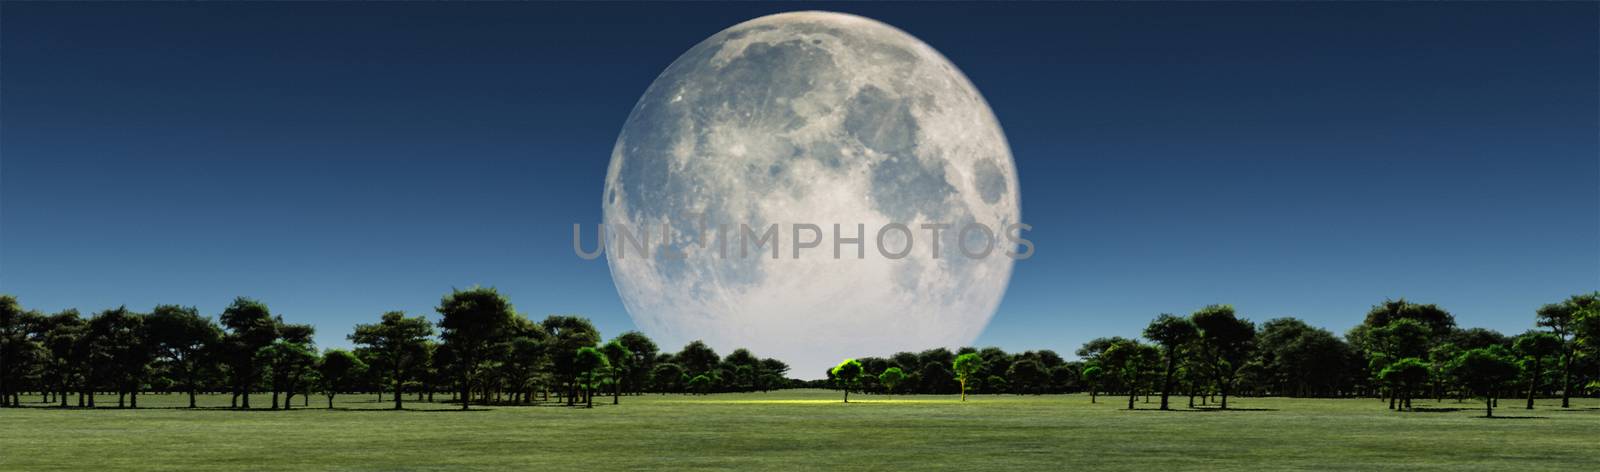 Giant moon by applesstock